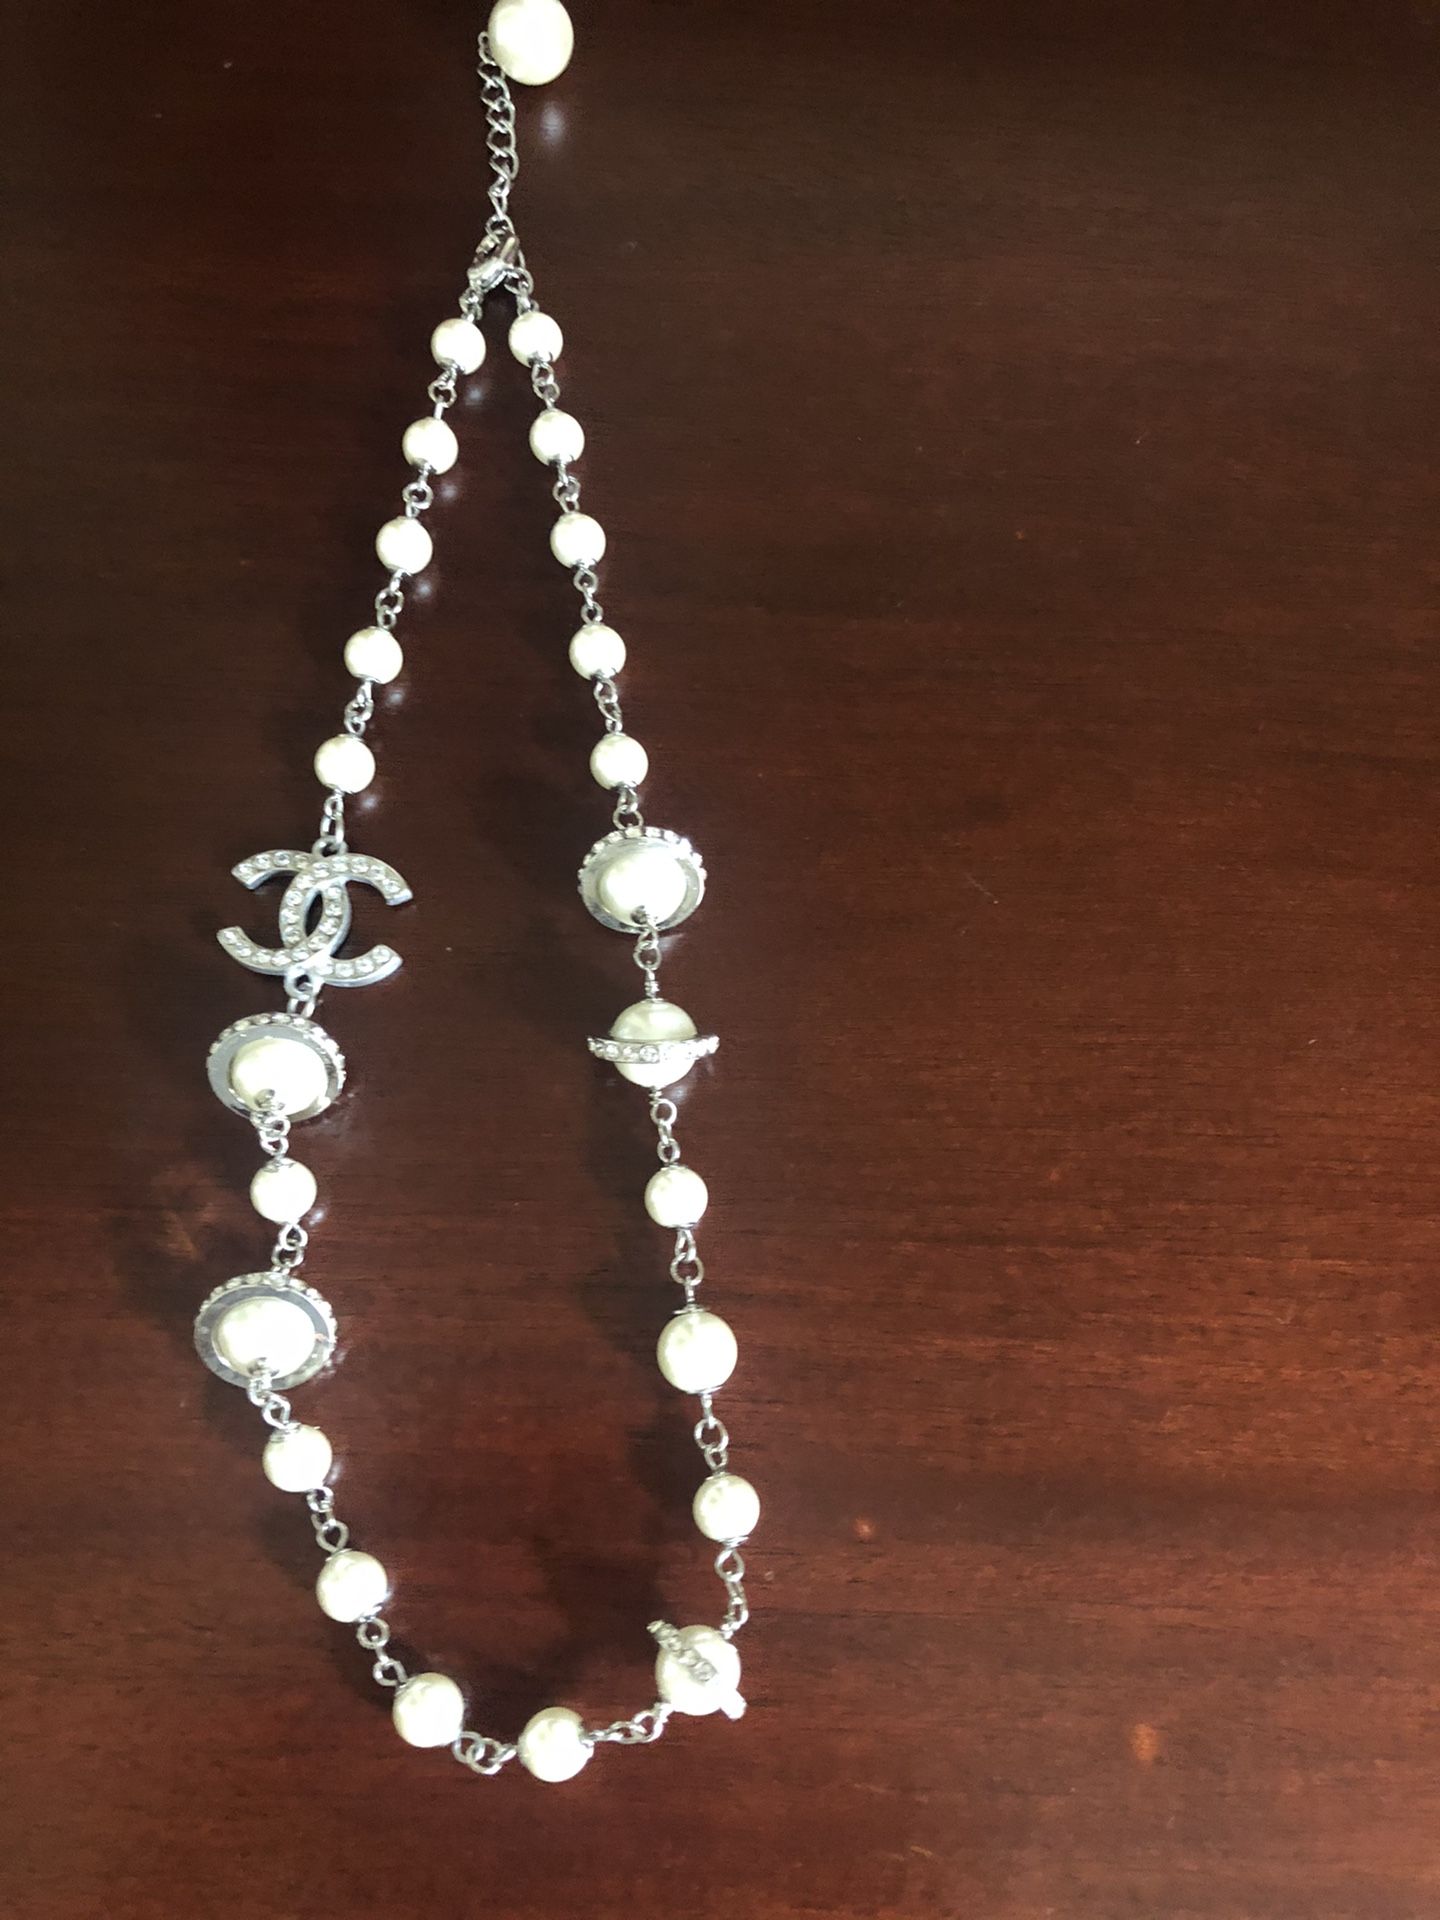 Chanel silver charm necklace